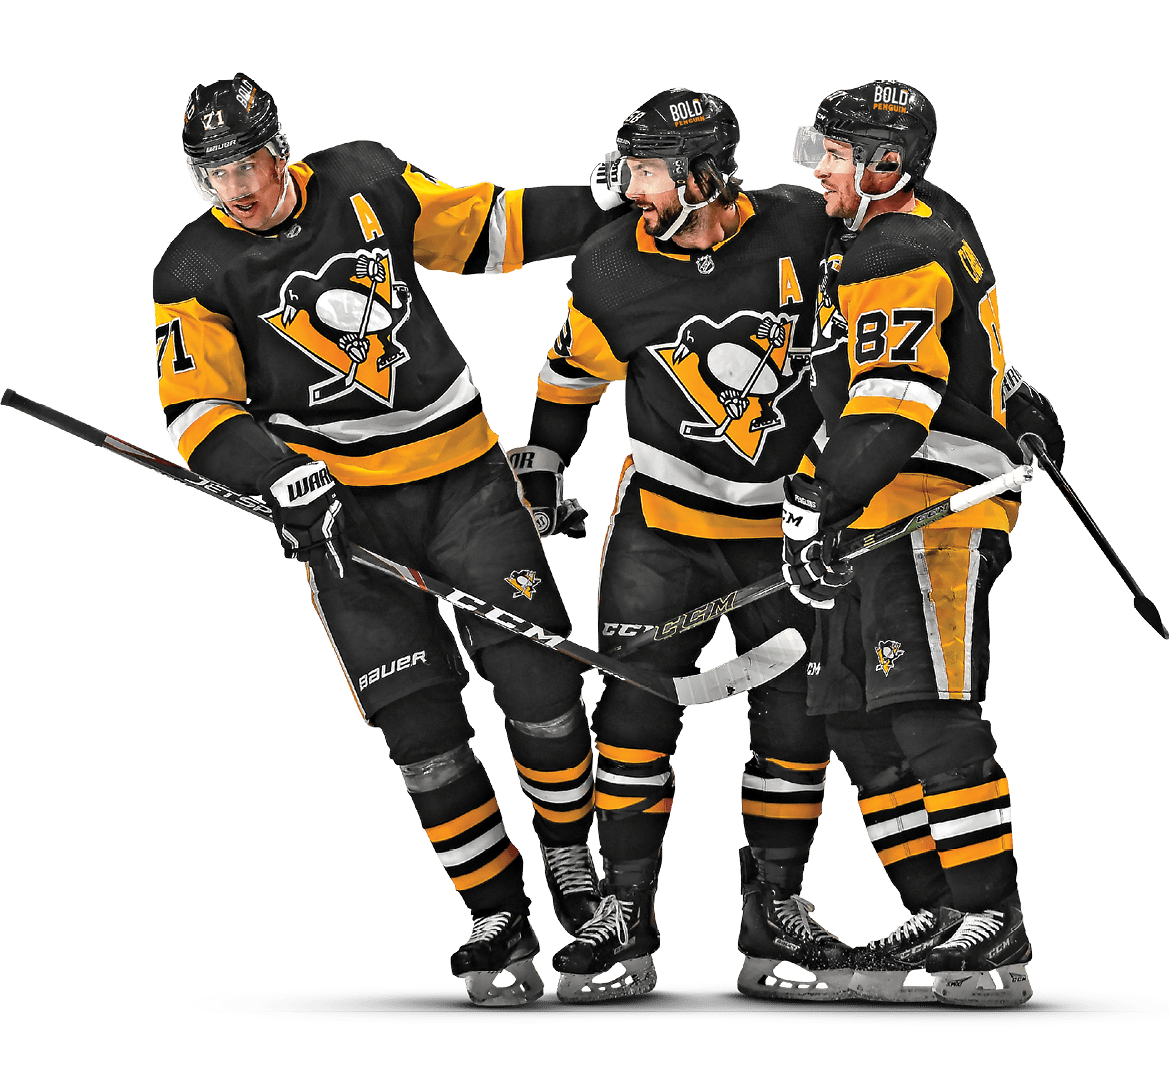 February 14, 2020 - Pittsburgh Penguins vs Montreal Canadiens at PPG Paints Arena  Pittsburgh won the game 4-1 